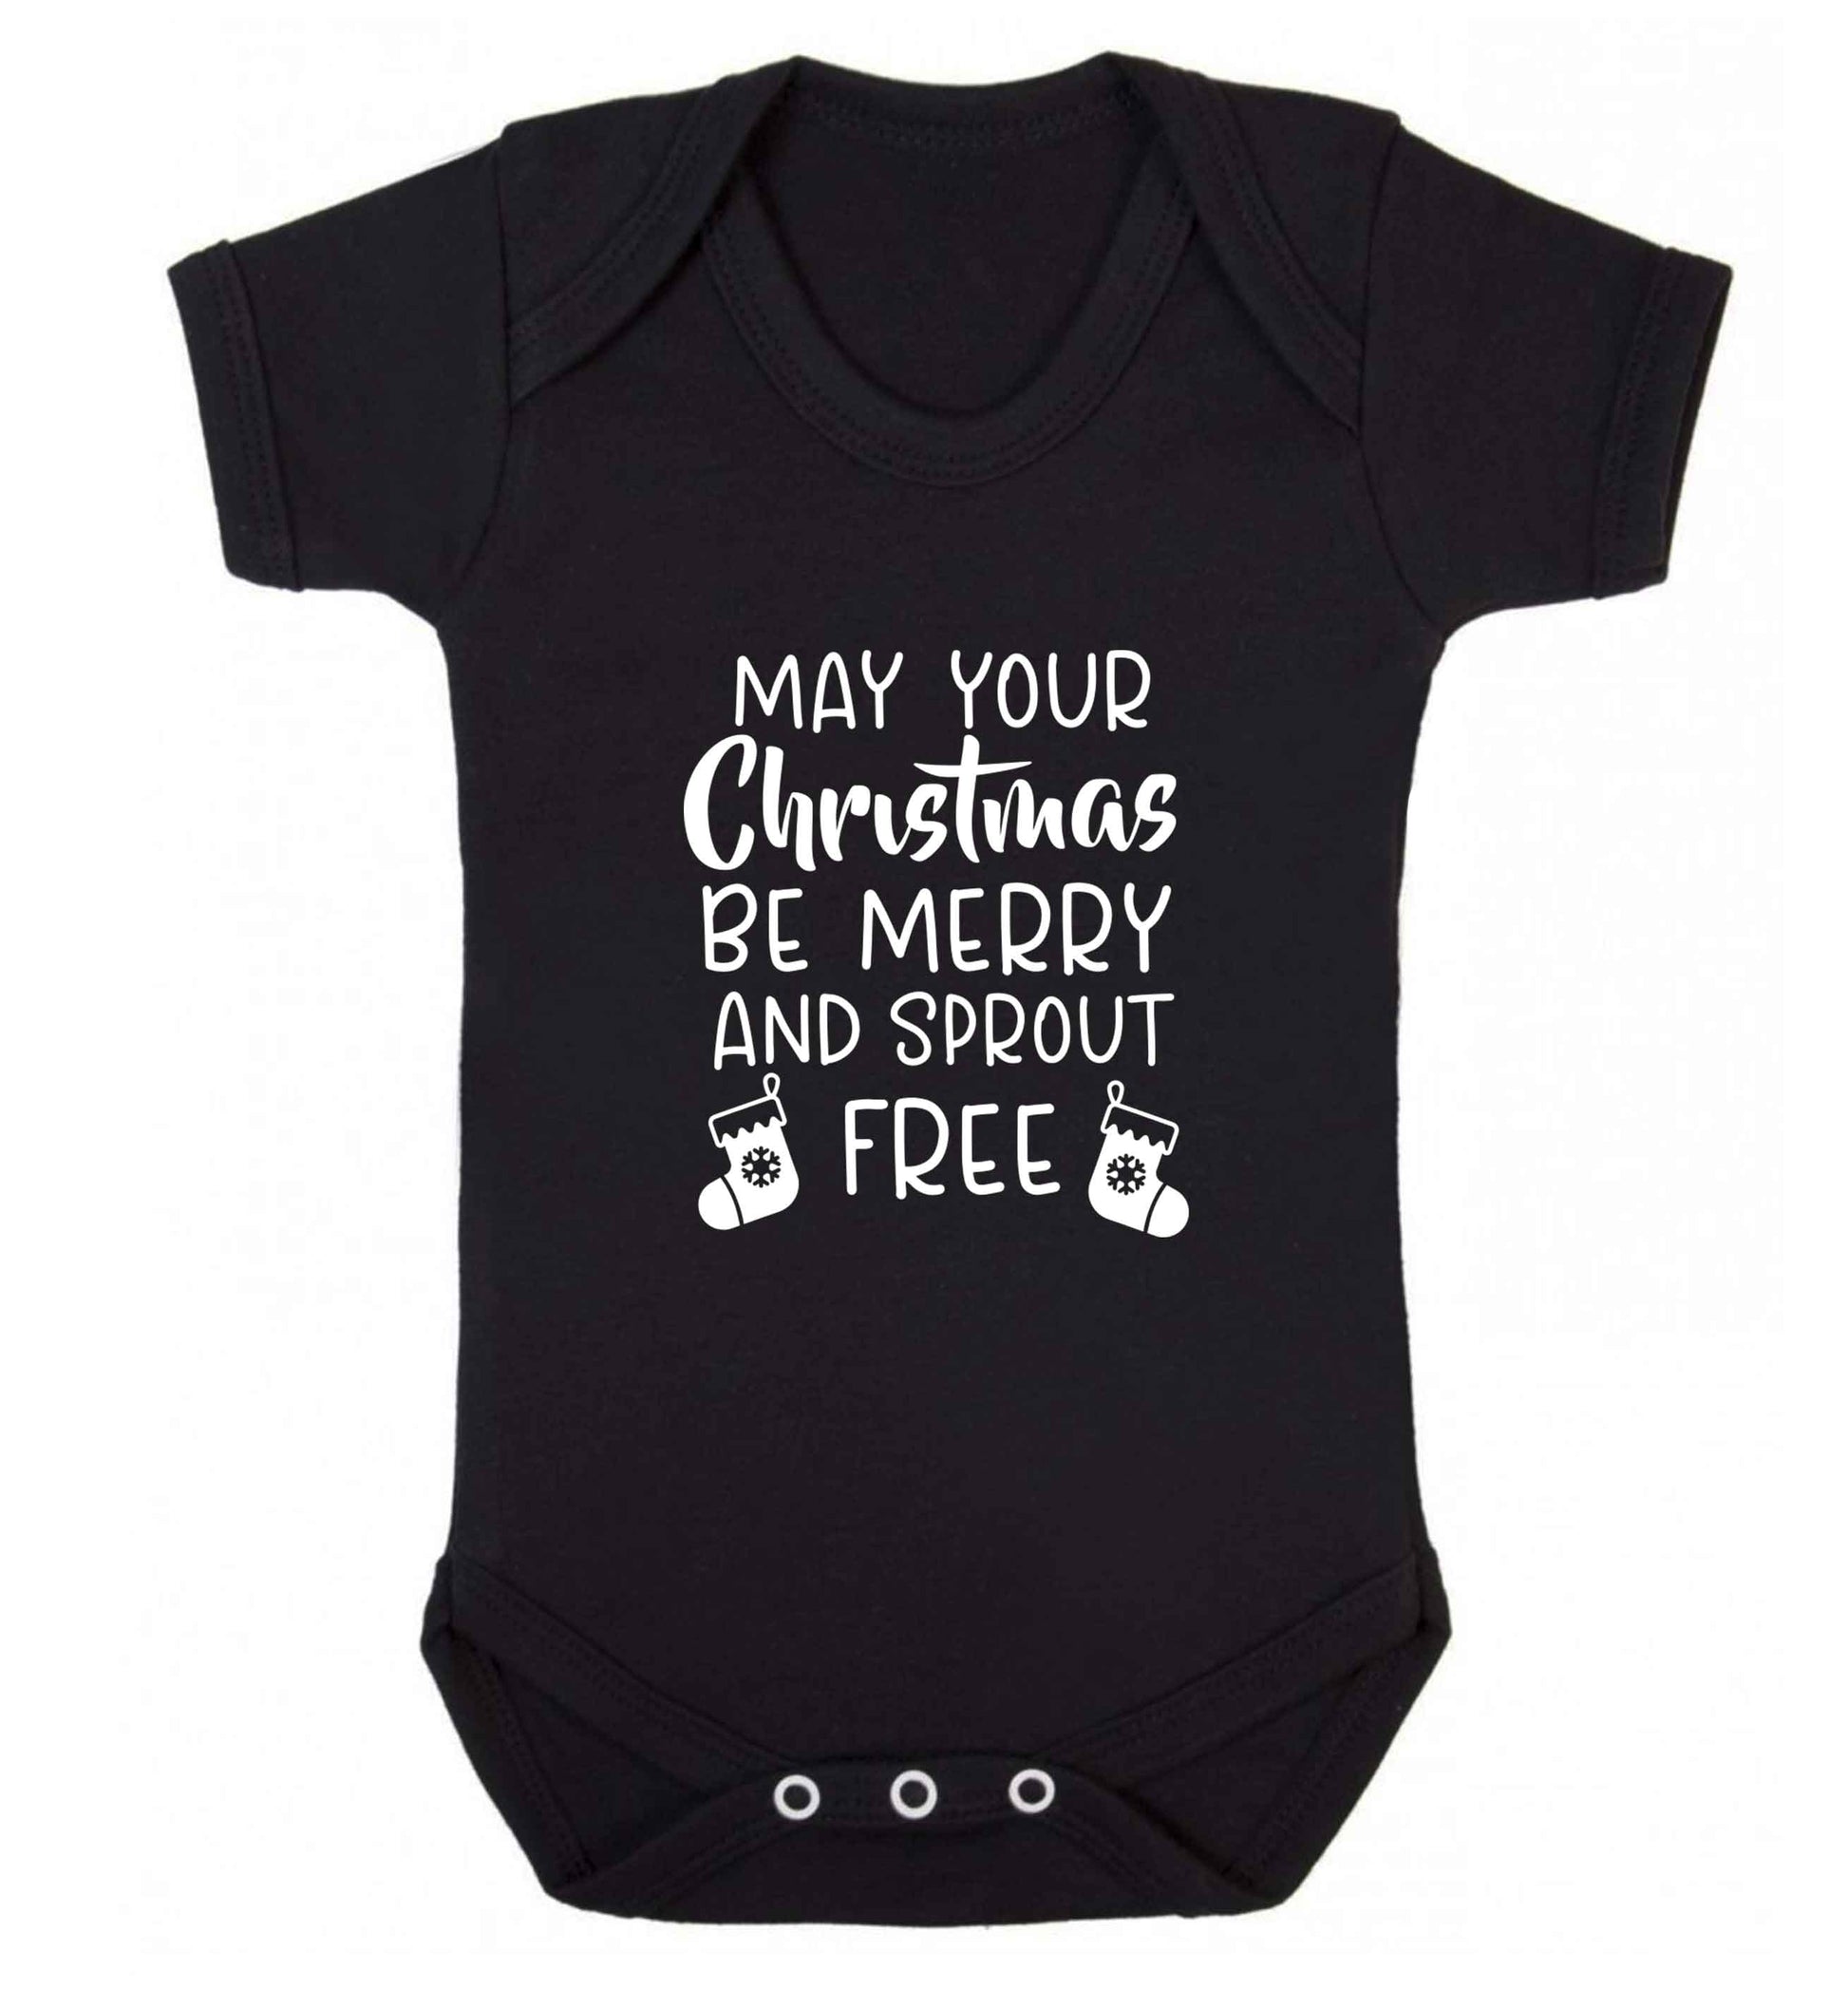 May your Christmas be merry and sprout free baby vest black 18-24 months